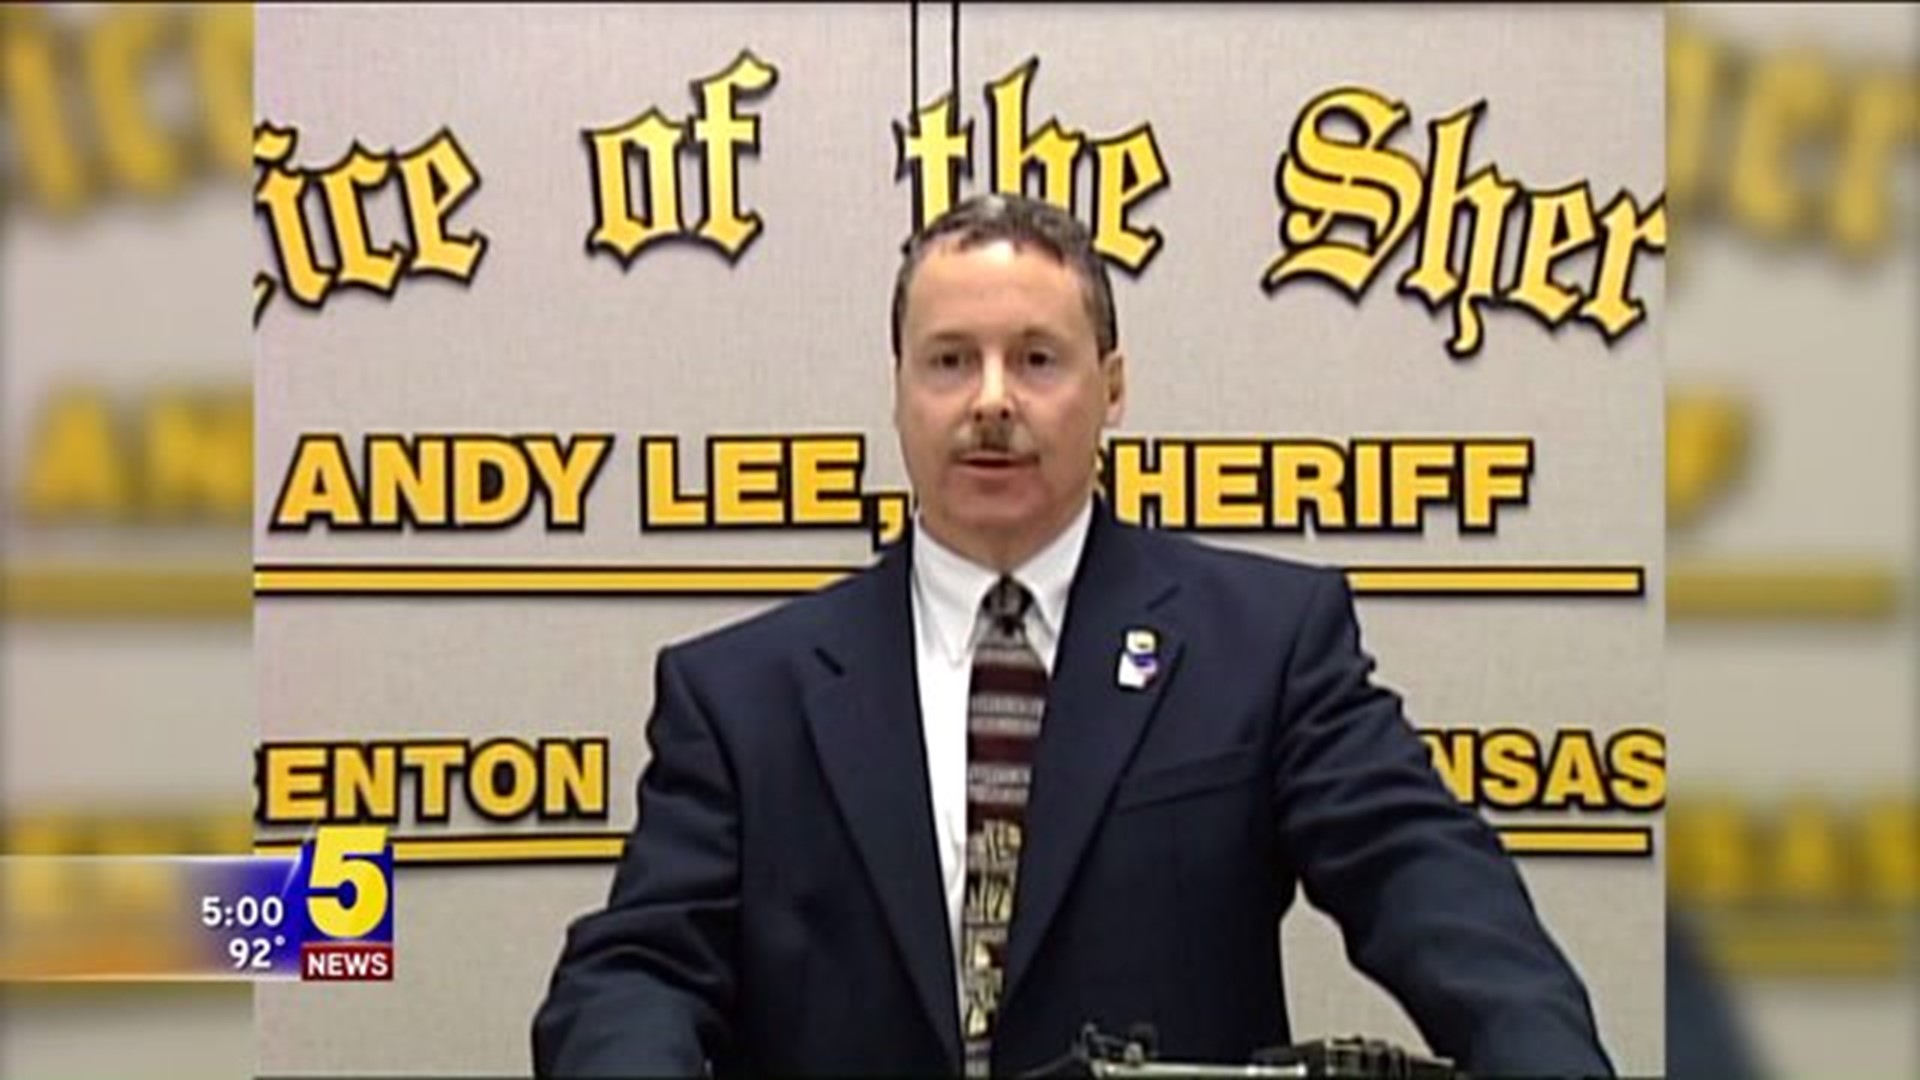 BENTON COUNTY SHERIFF ANDY LEE REMEMBERED